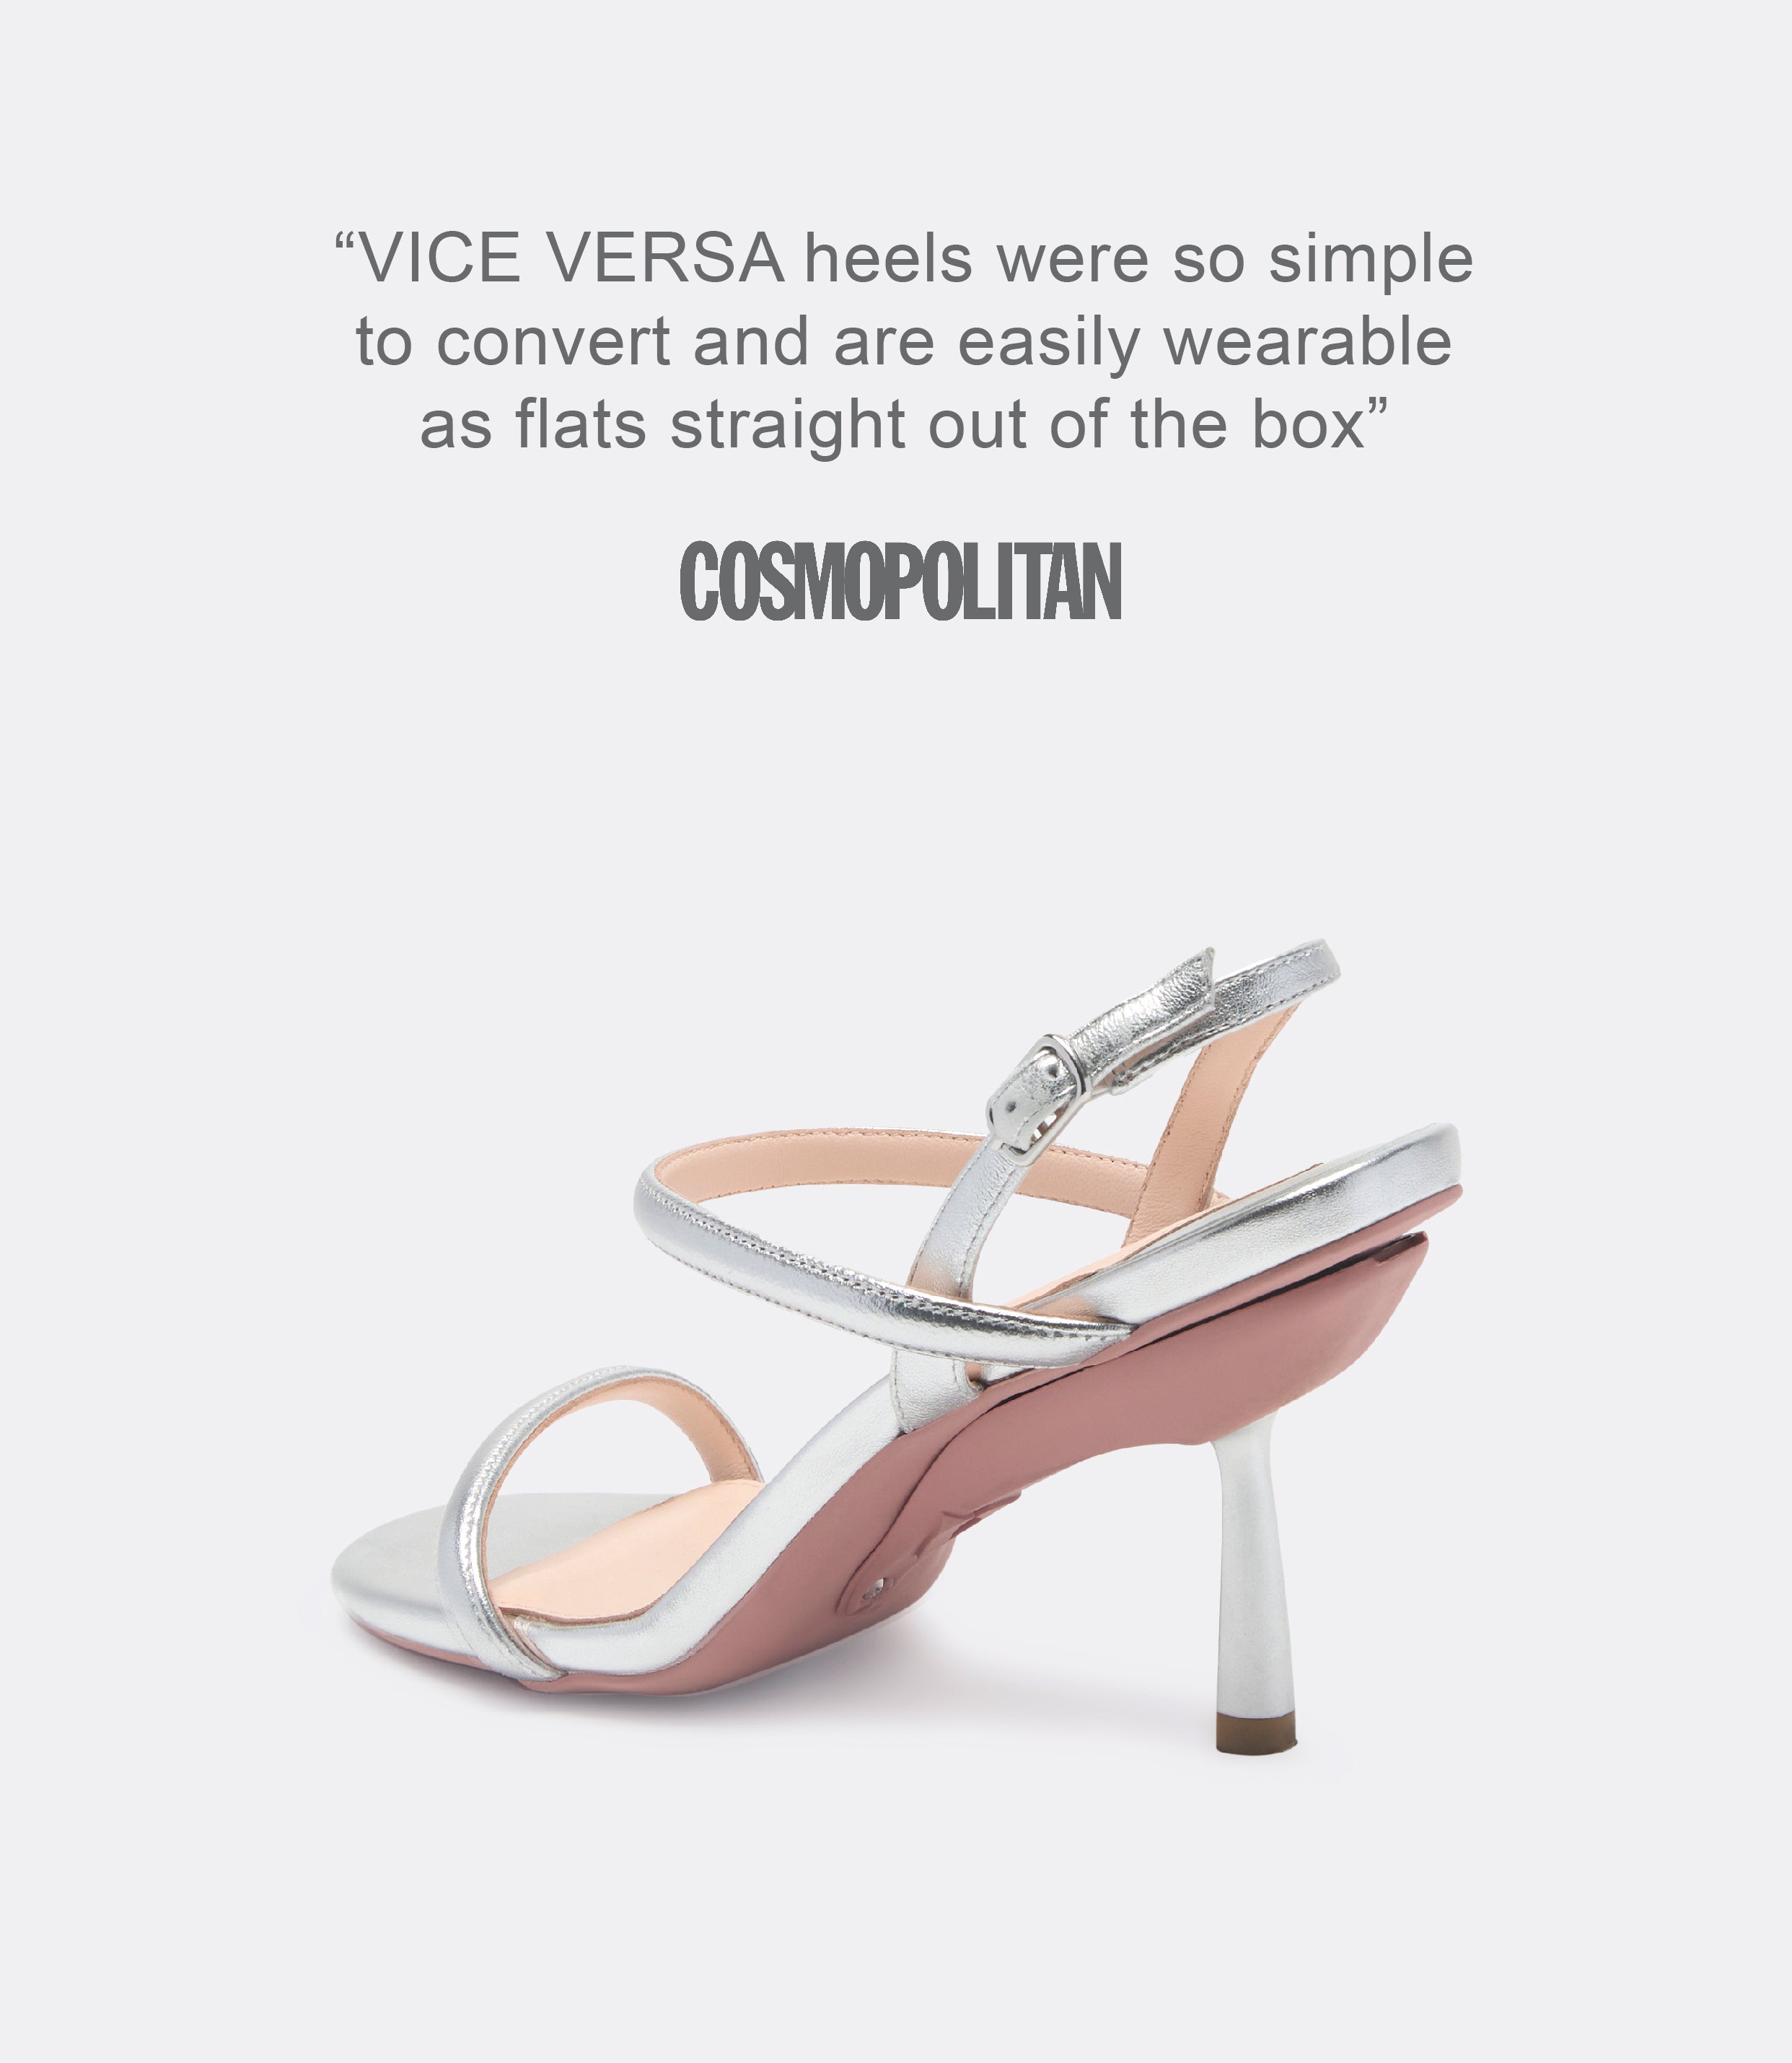 A quote from Cosmopolitan and a back view of a silver leather heel.